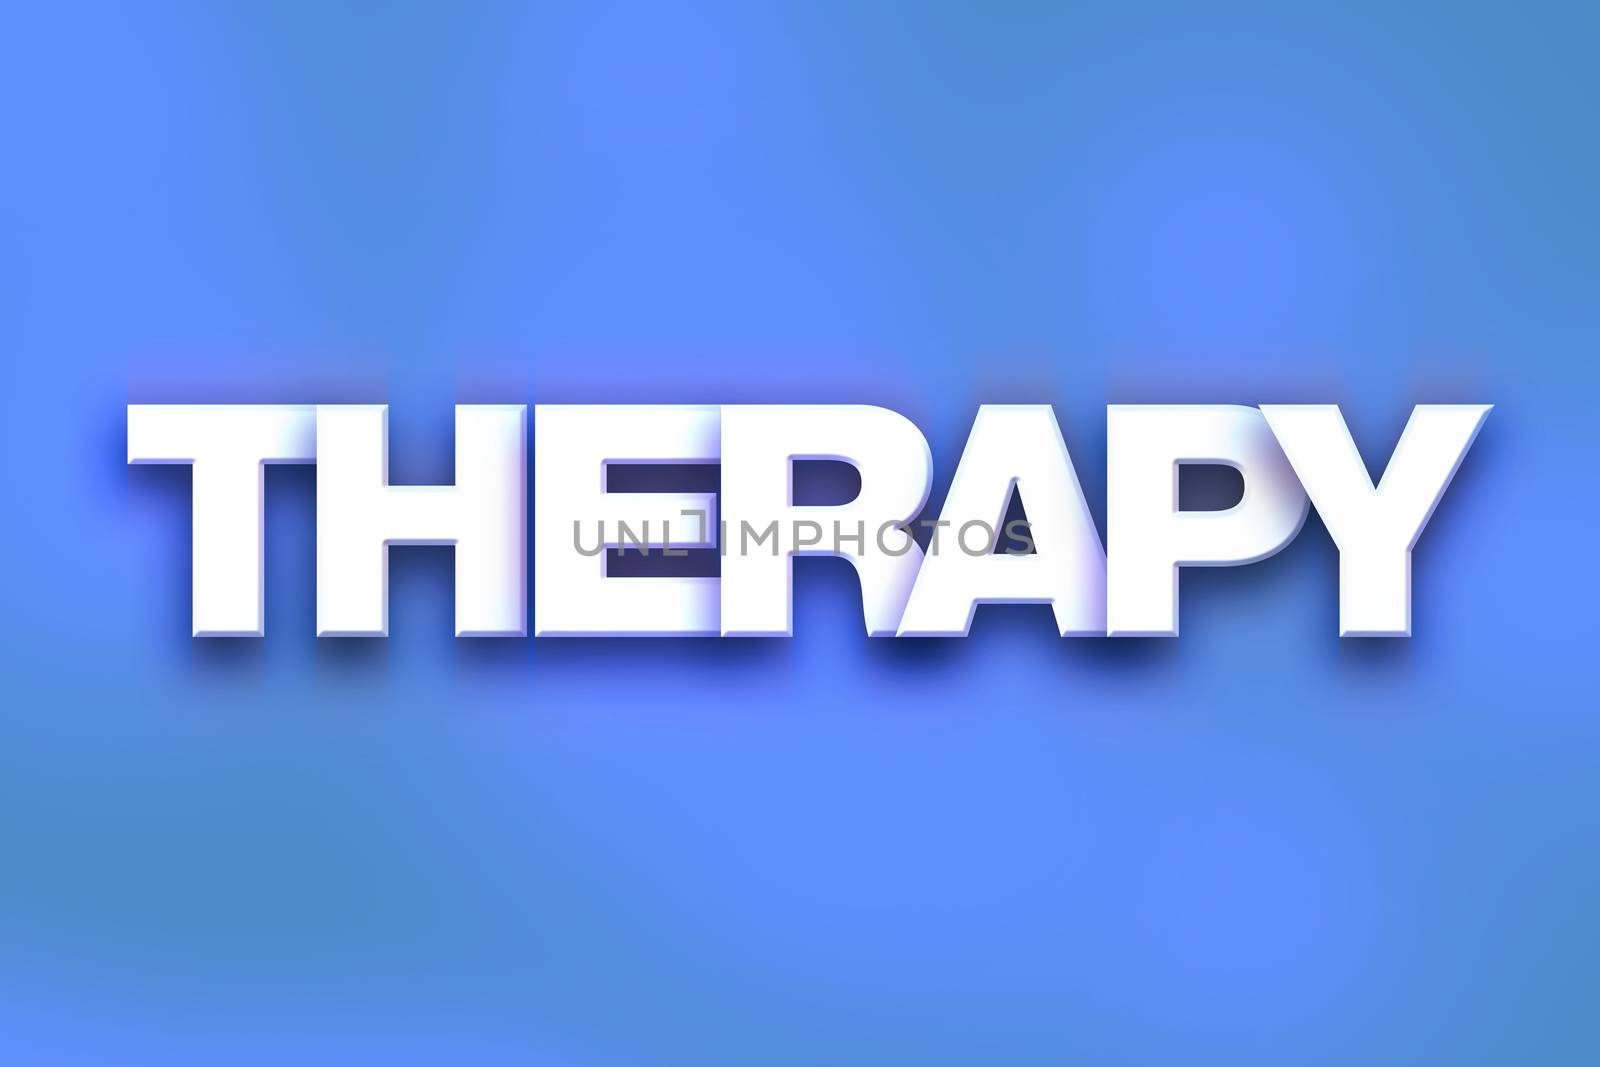 The word "Therapy" written in white 3D letters on a colorful background concept and theme.